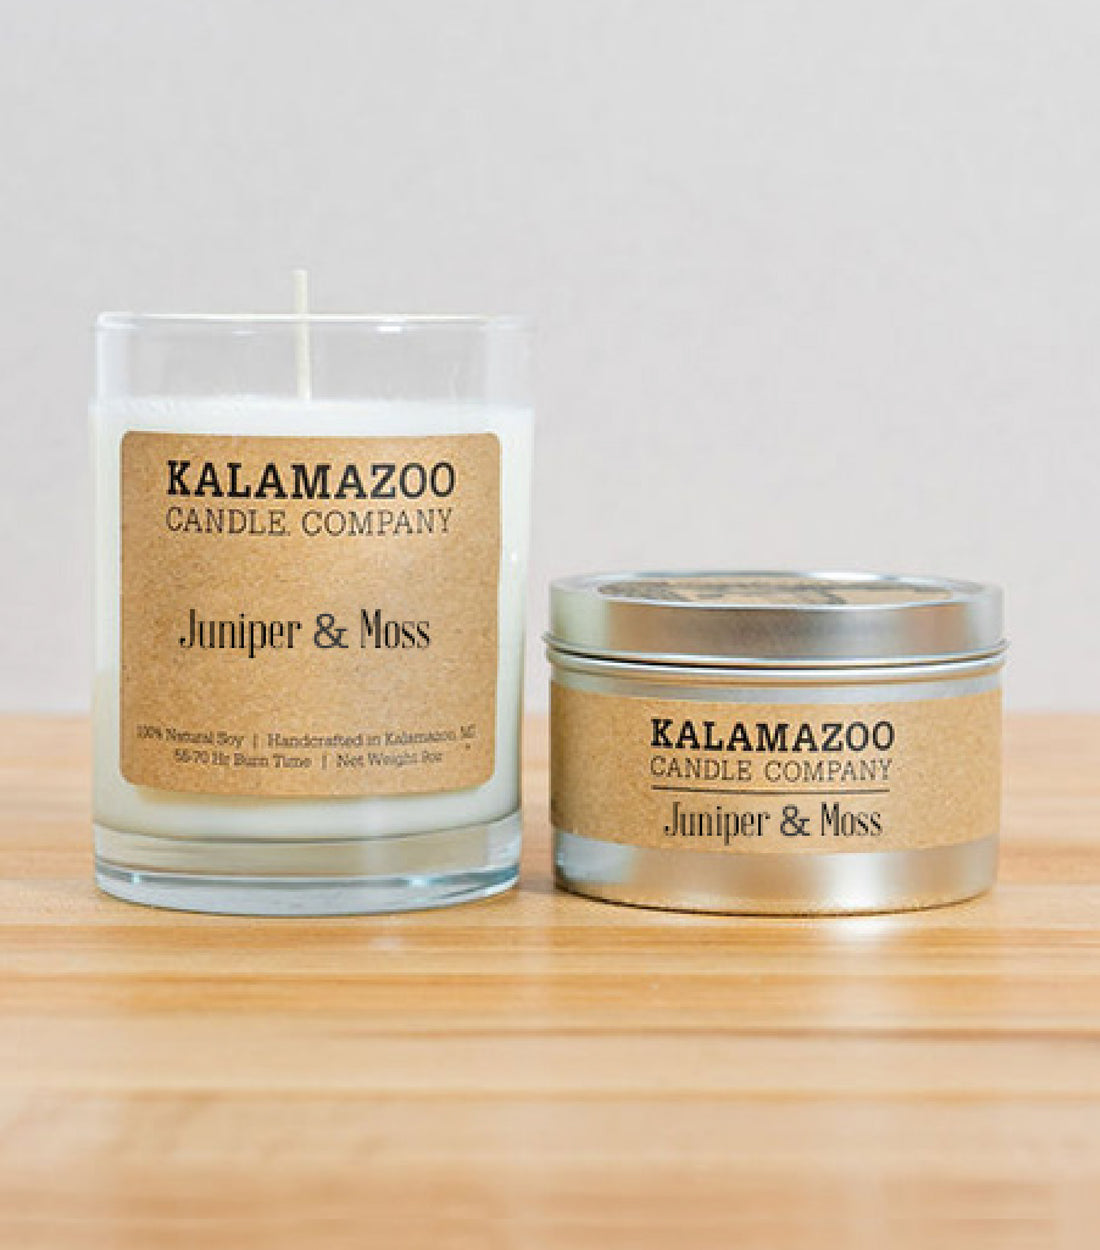 A refreshing burst of cold winter air filled with the smell of Douglas Fir trees and frosted Juniper Berries.  Made with 100% Soy Wax and Locally Sourced Ingredients.